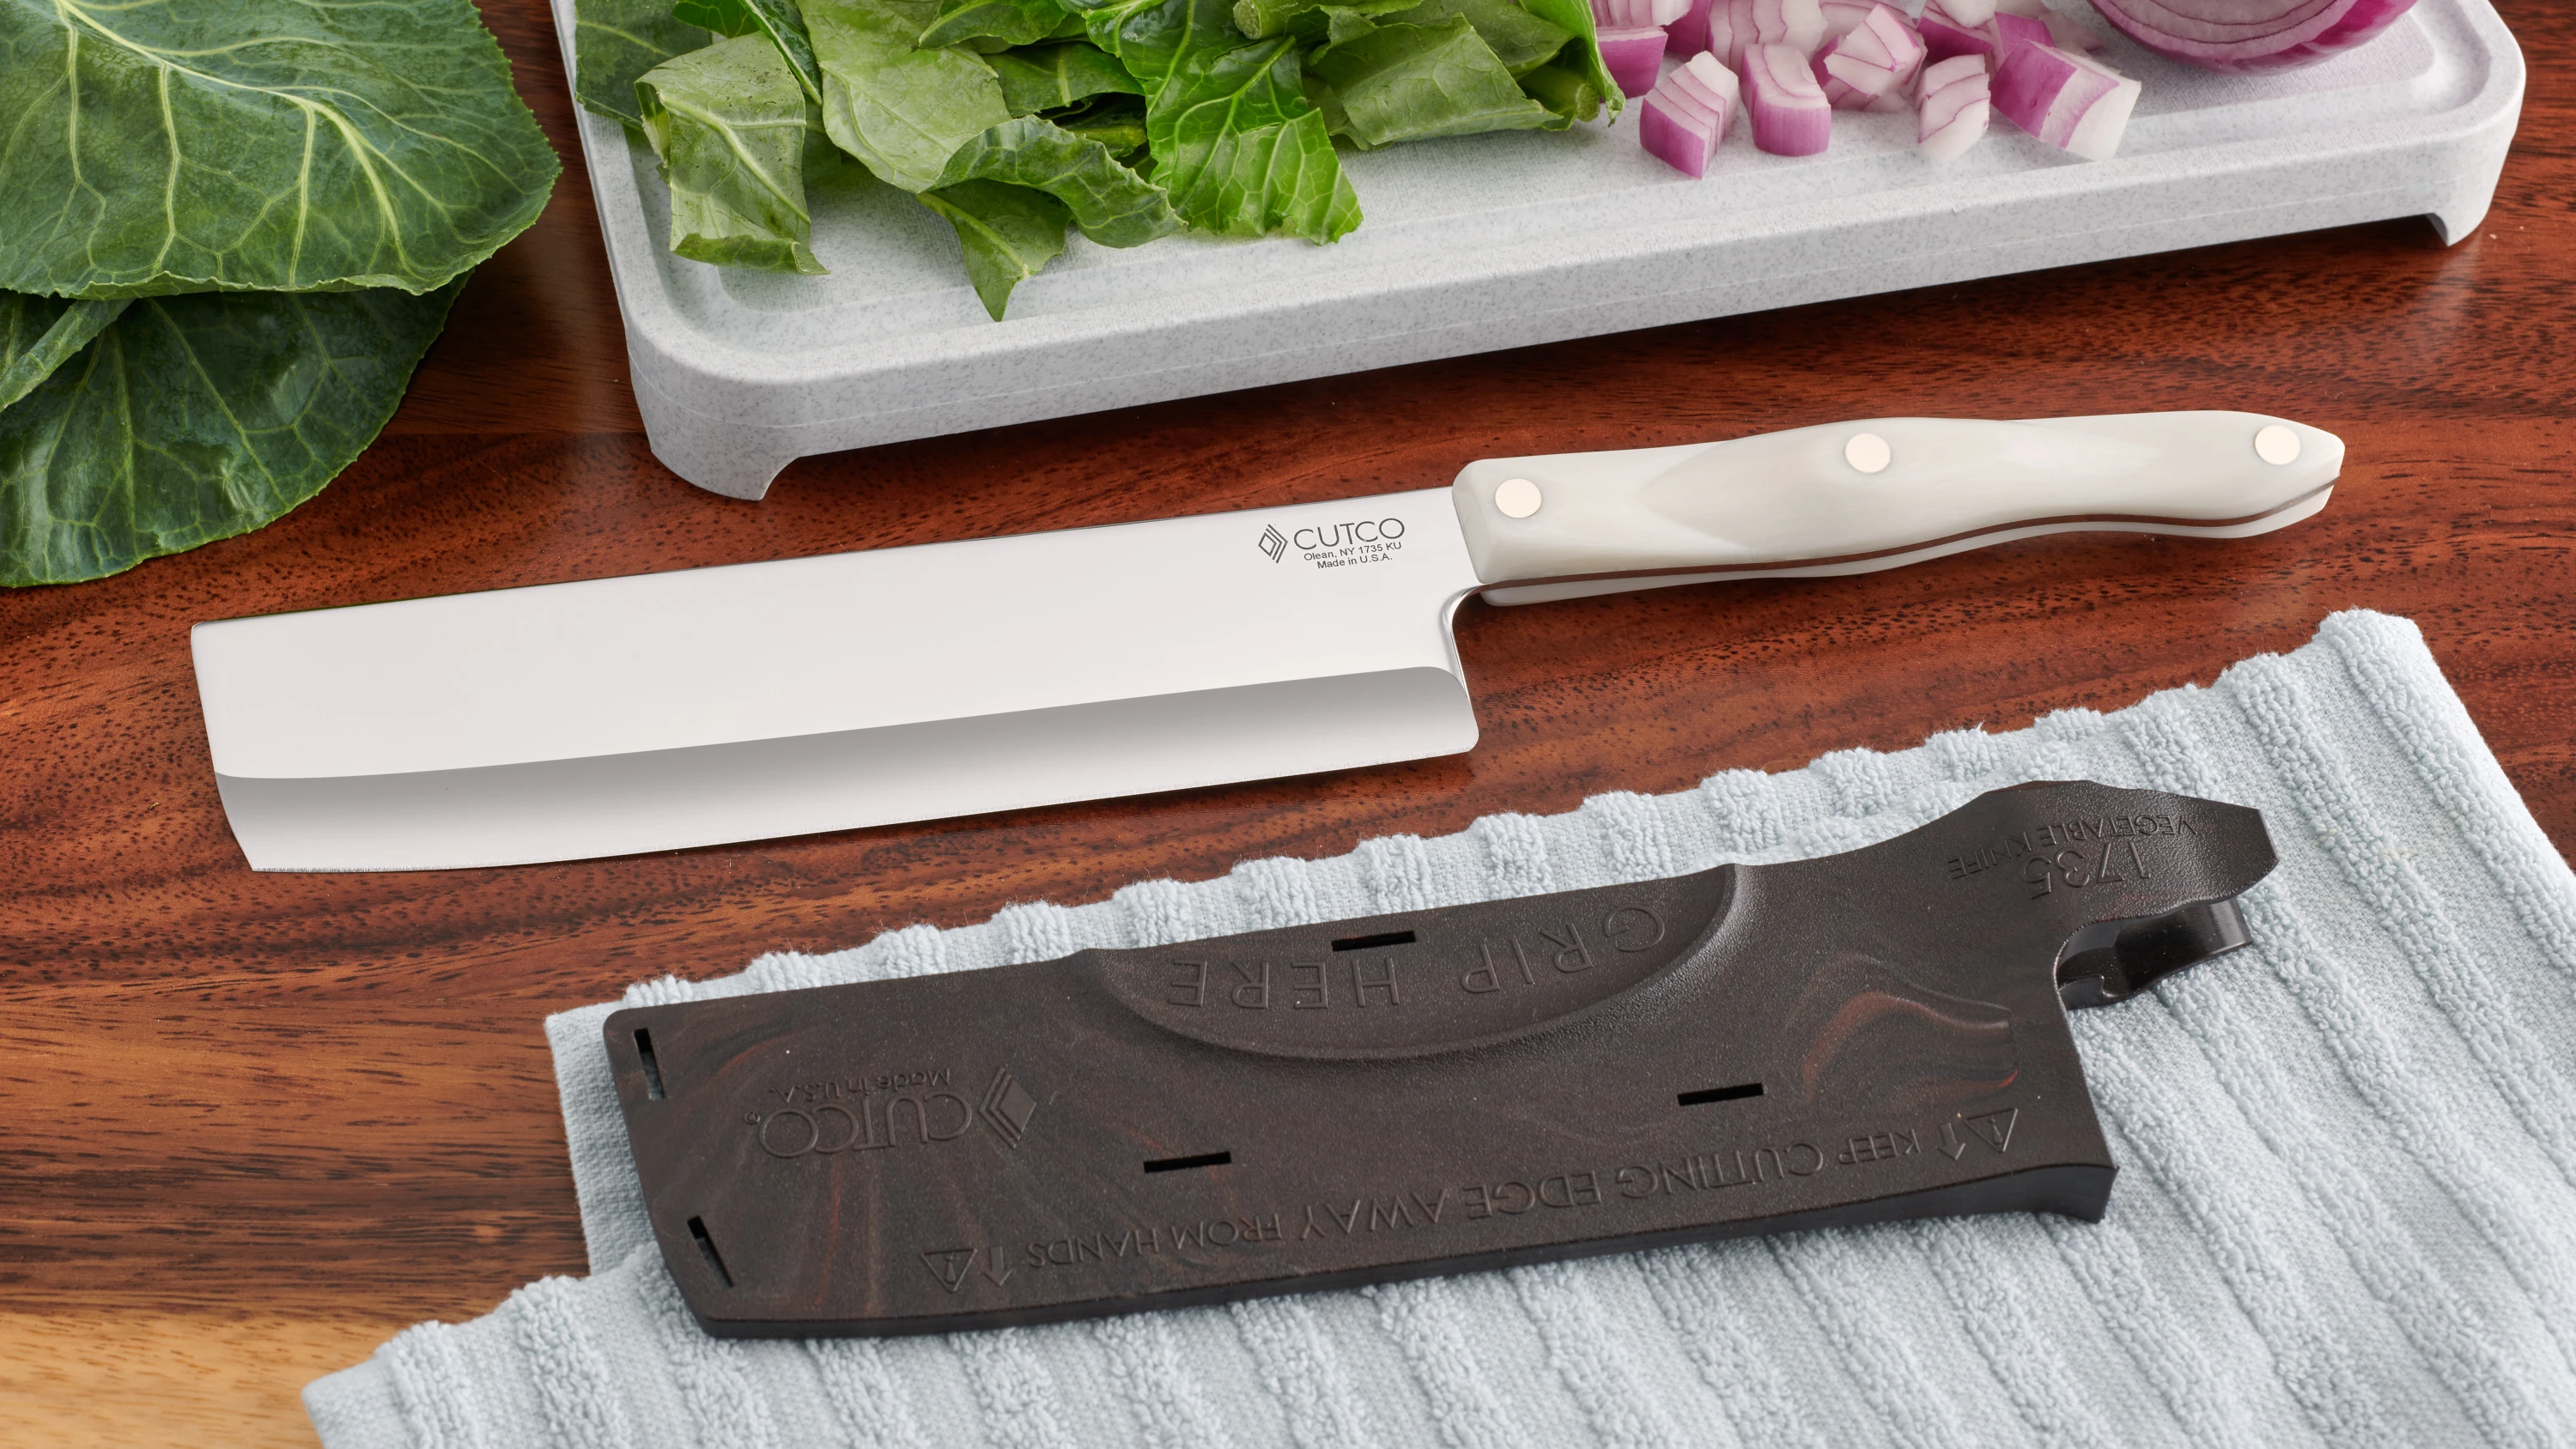  CUTCO Model 1735 Vegetable Knife7.7 x 2.0 High  Carbon Stainless Straight Edge blade and 5¾ Classic Brown (Black)  Handlein factory-sealed plastic bag: Vegetable Cleavers: Home &  Kitchen